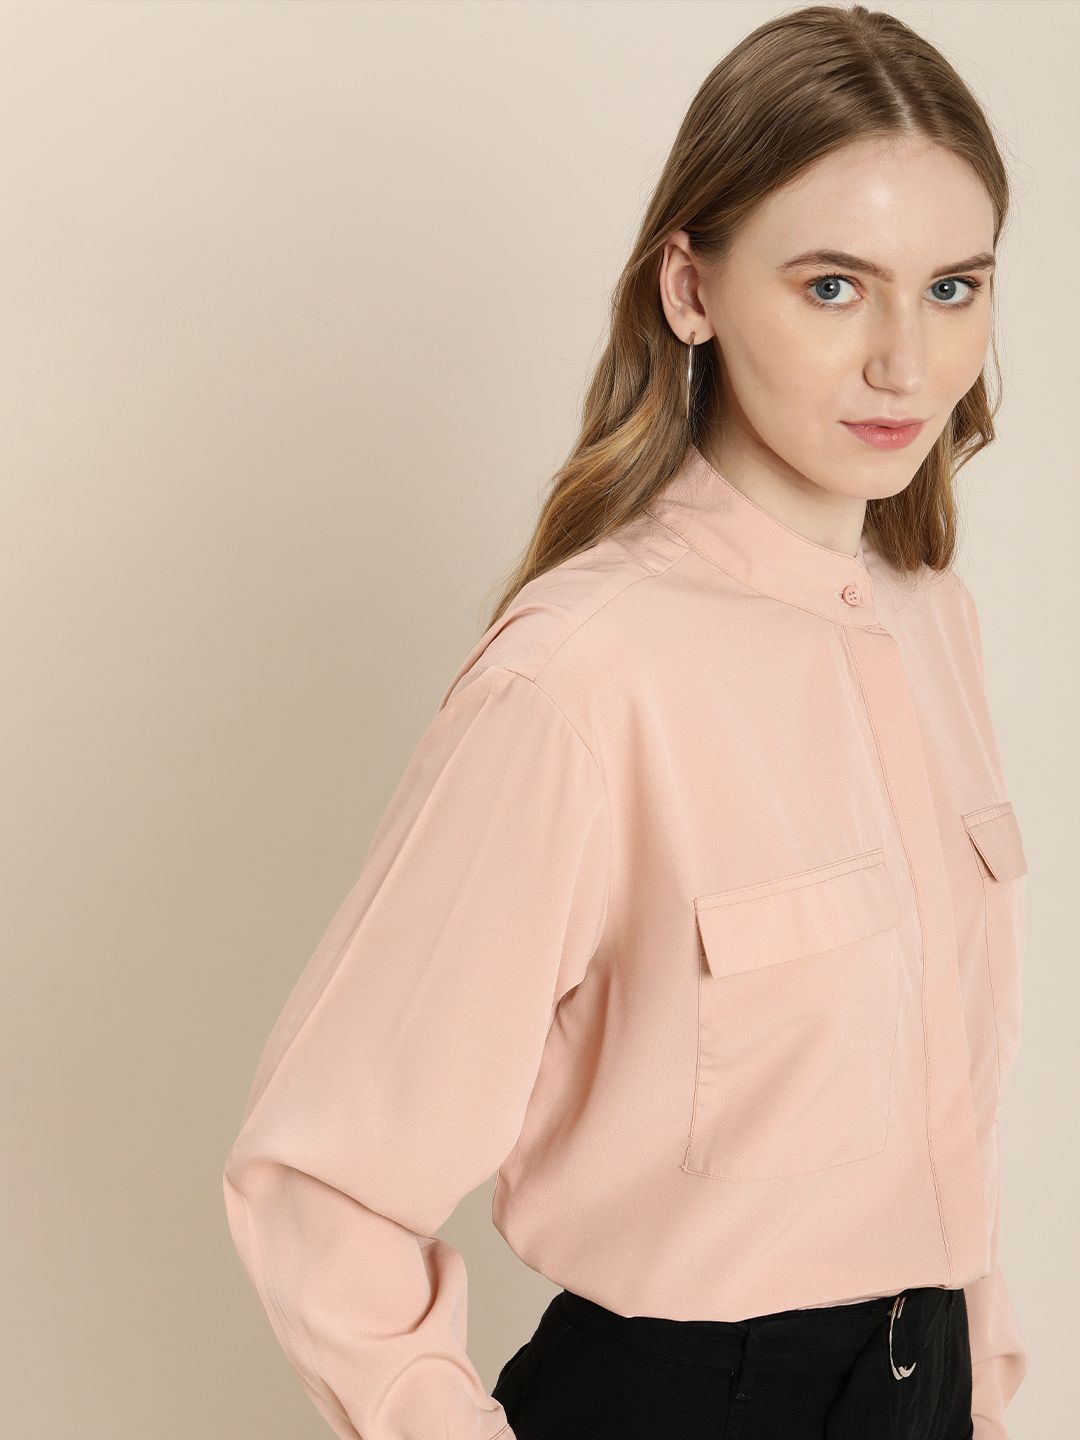 encore by INVICTUS Women Solid Band Collar Casual Shirt Price in India